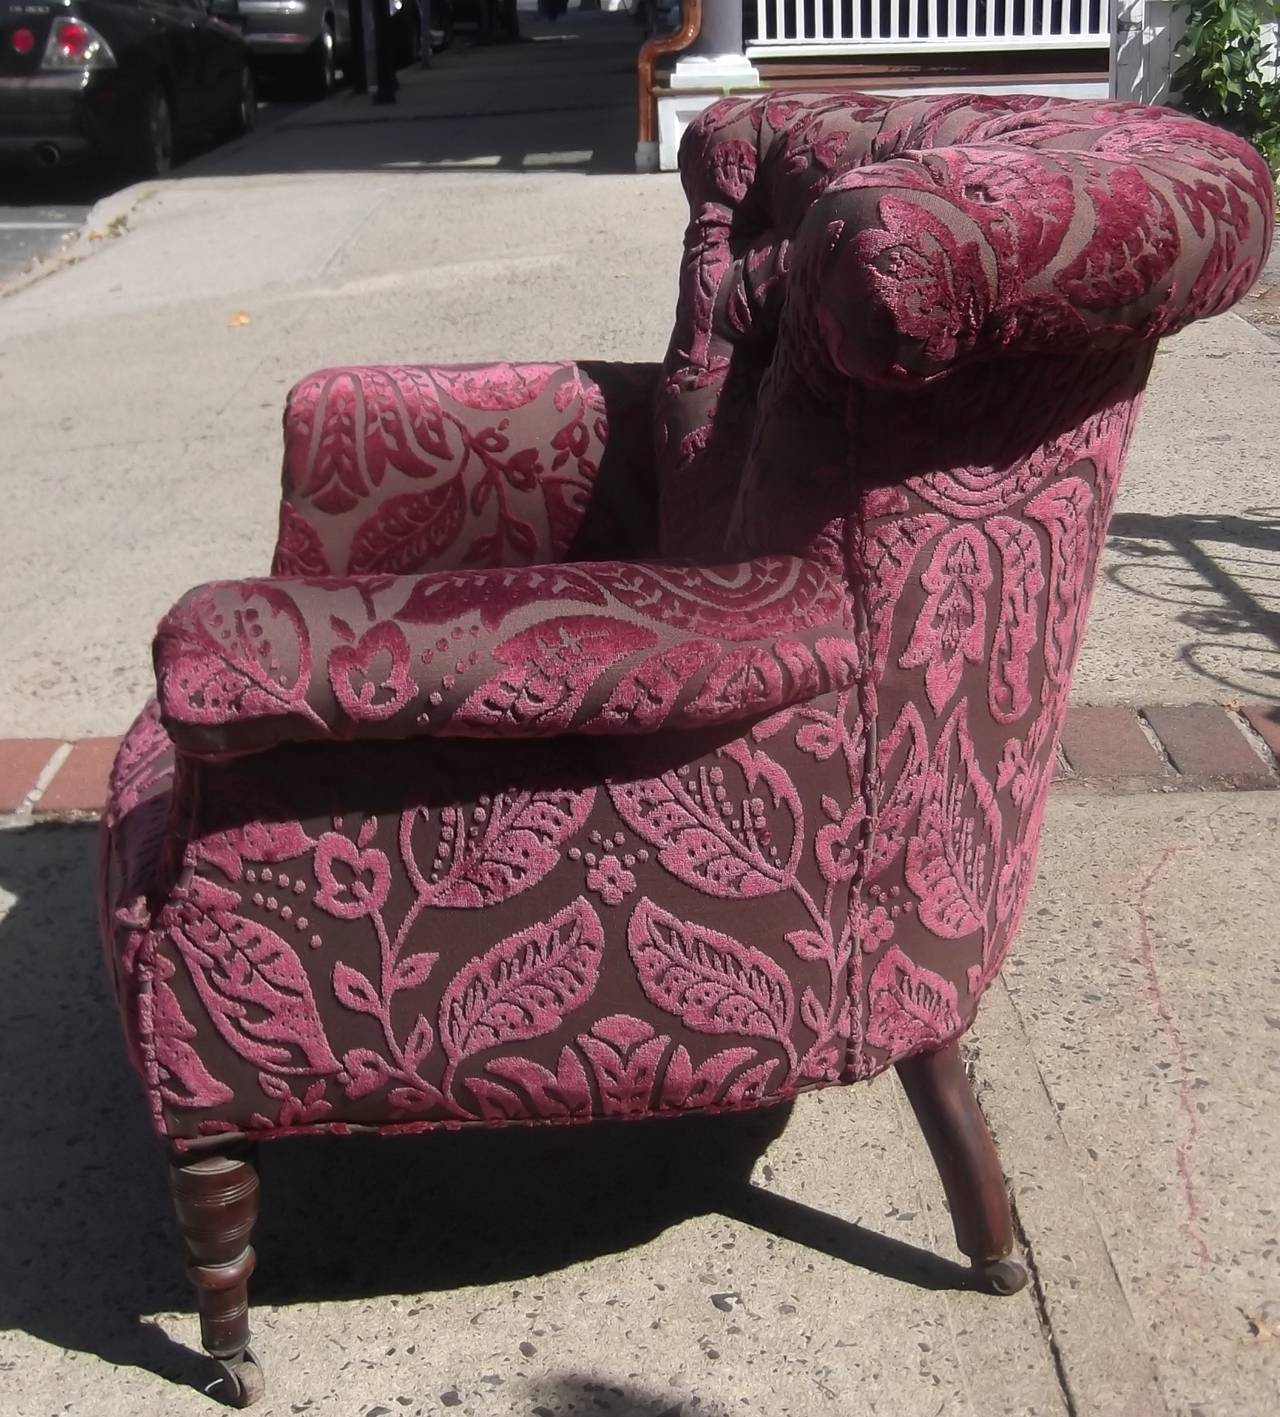 Very shapely tufted armchair with new upholstery.
Comfortable curved back with rolled over detail. Eight-way hand tied springs with turned walnut legs. This is a diminutive size and can be tucked away easily.
The fabric is a berry velvet with a